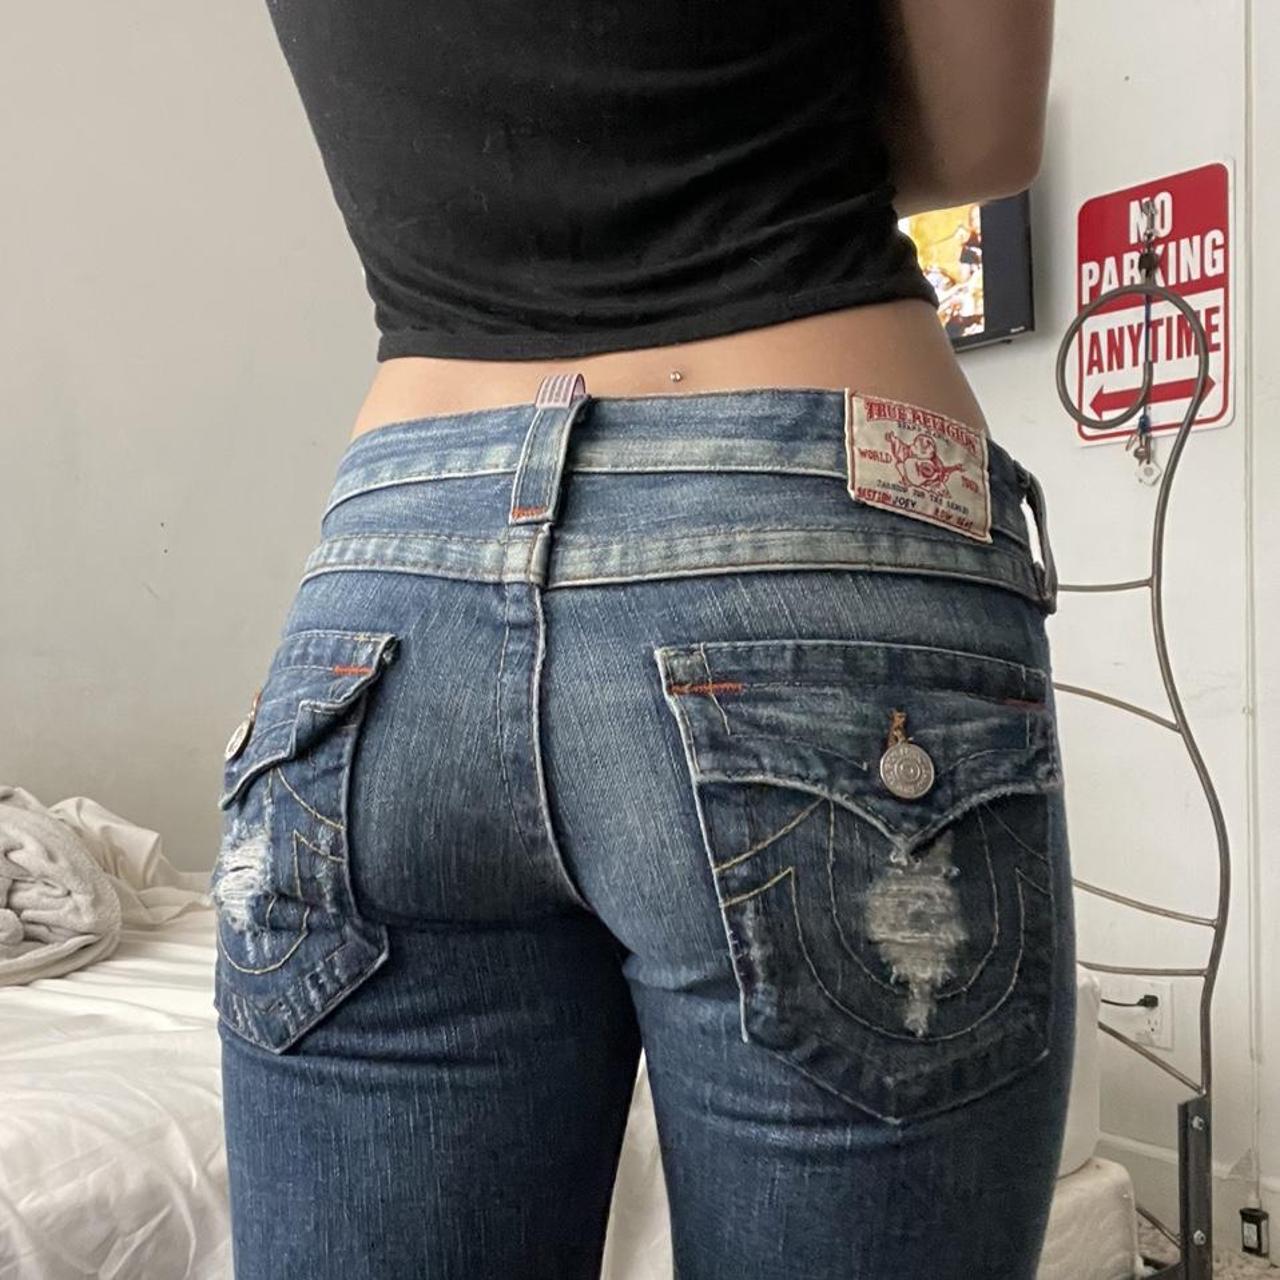 True religion jeans are a size 28 and 33 in inseam ... - Depop